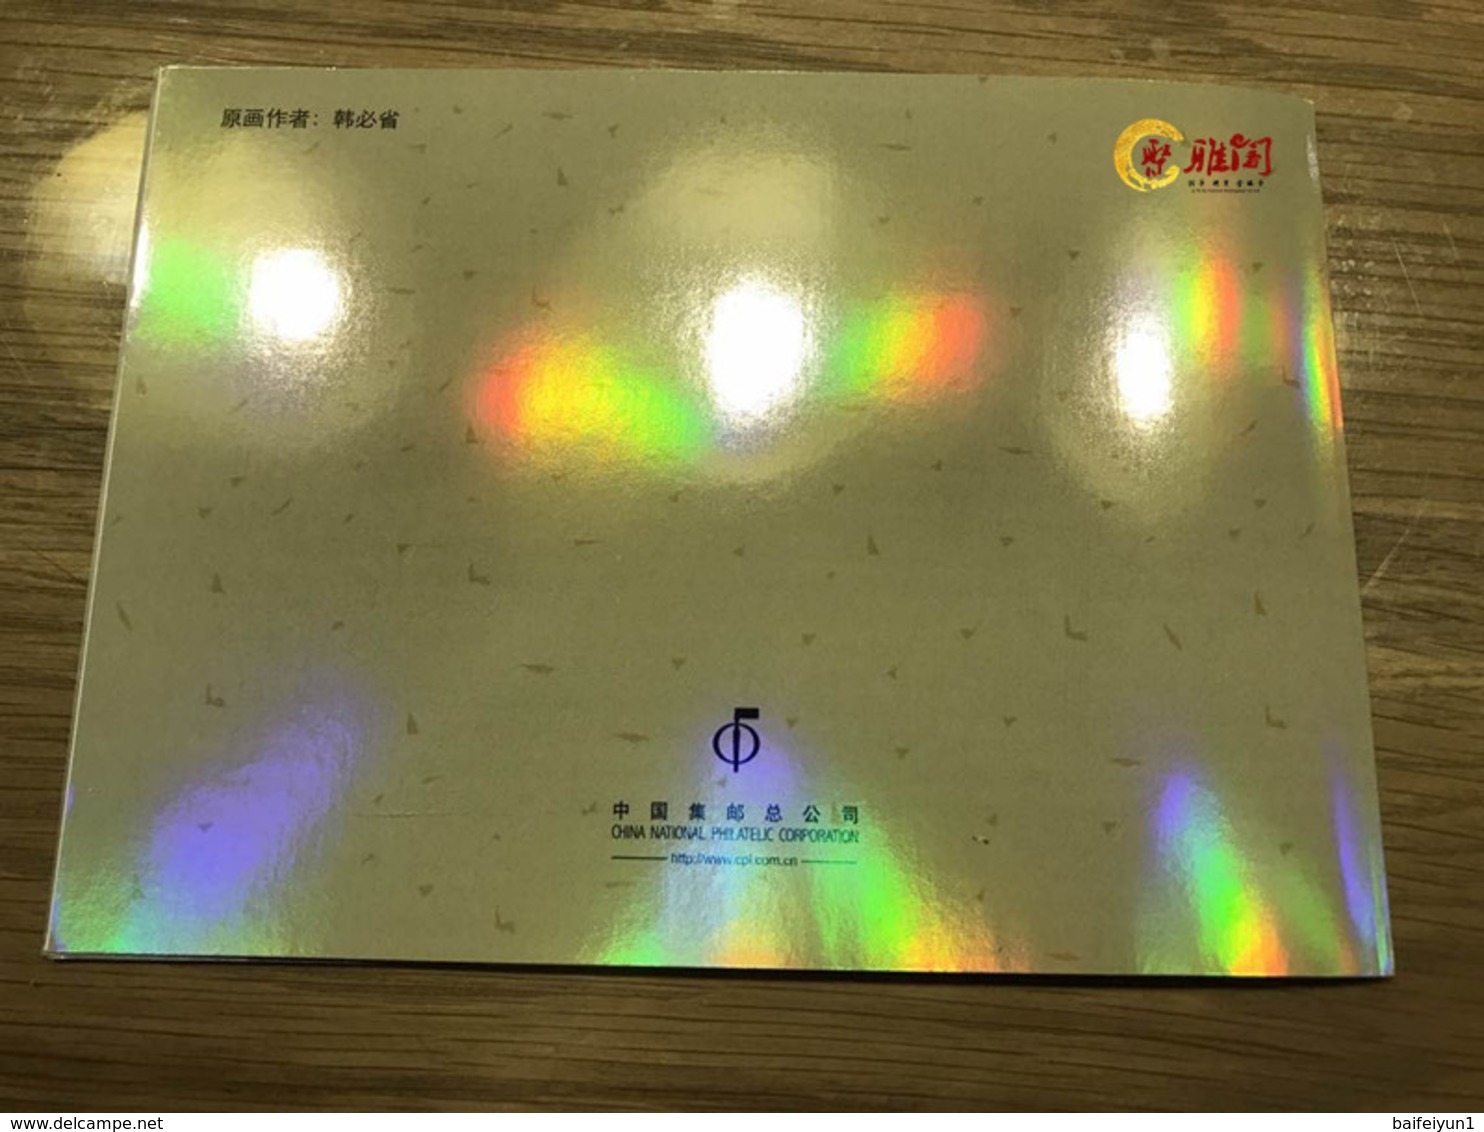 China 2016-1 Intelligent Monkey Celebrating The New Year Special S/S Booklet(Cover Is Holographic) - Hologrammes